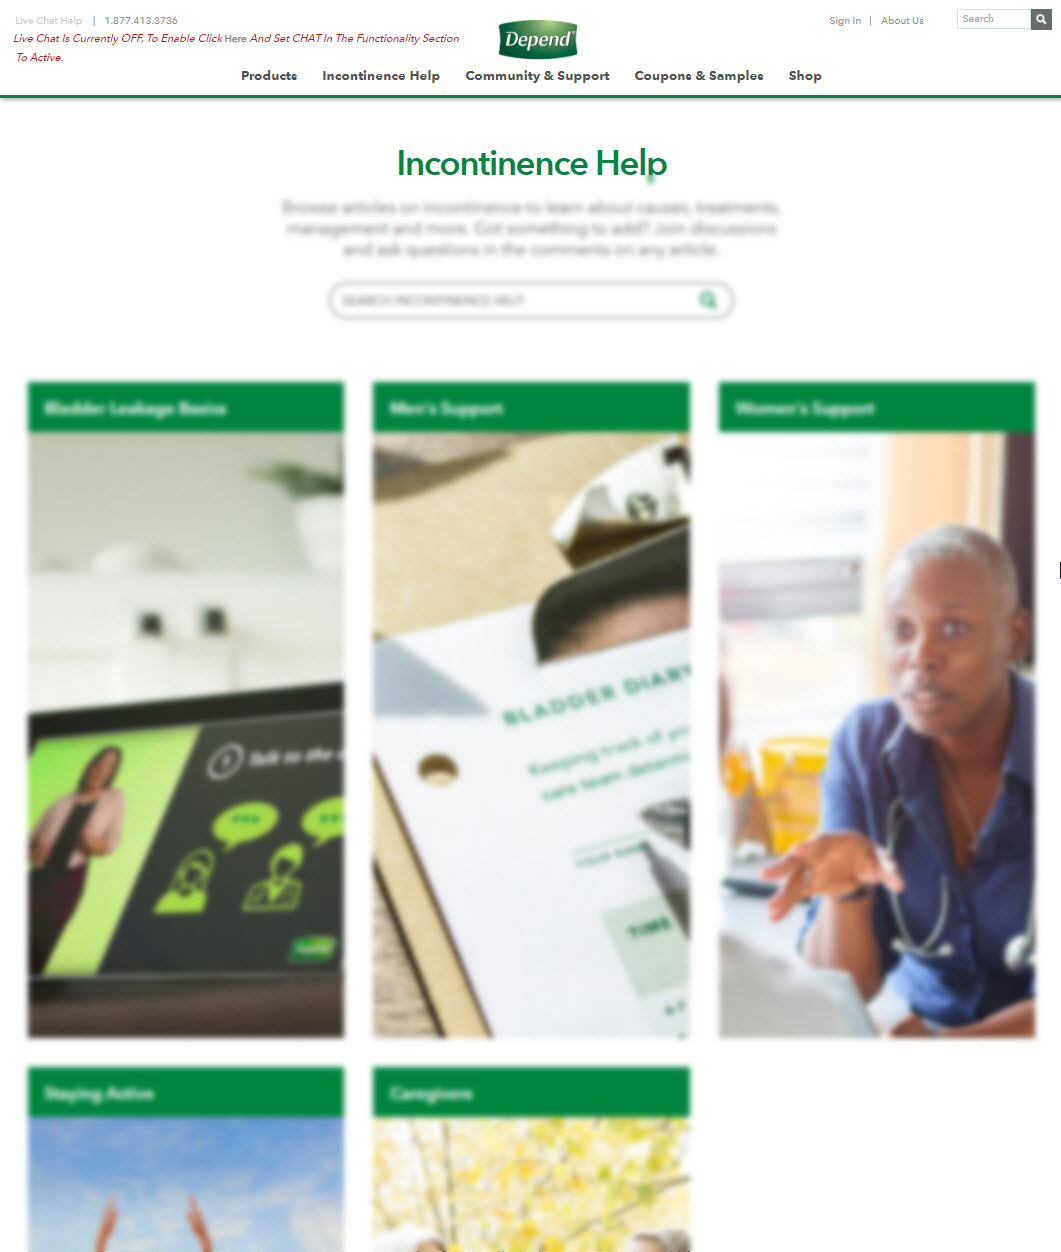 Incontinence Help